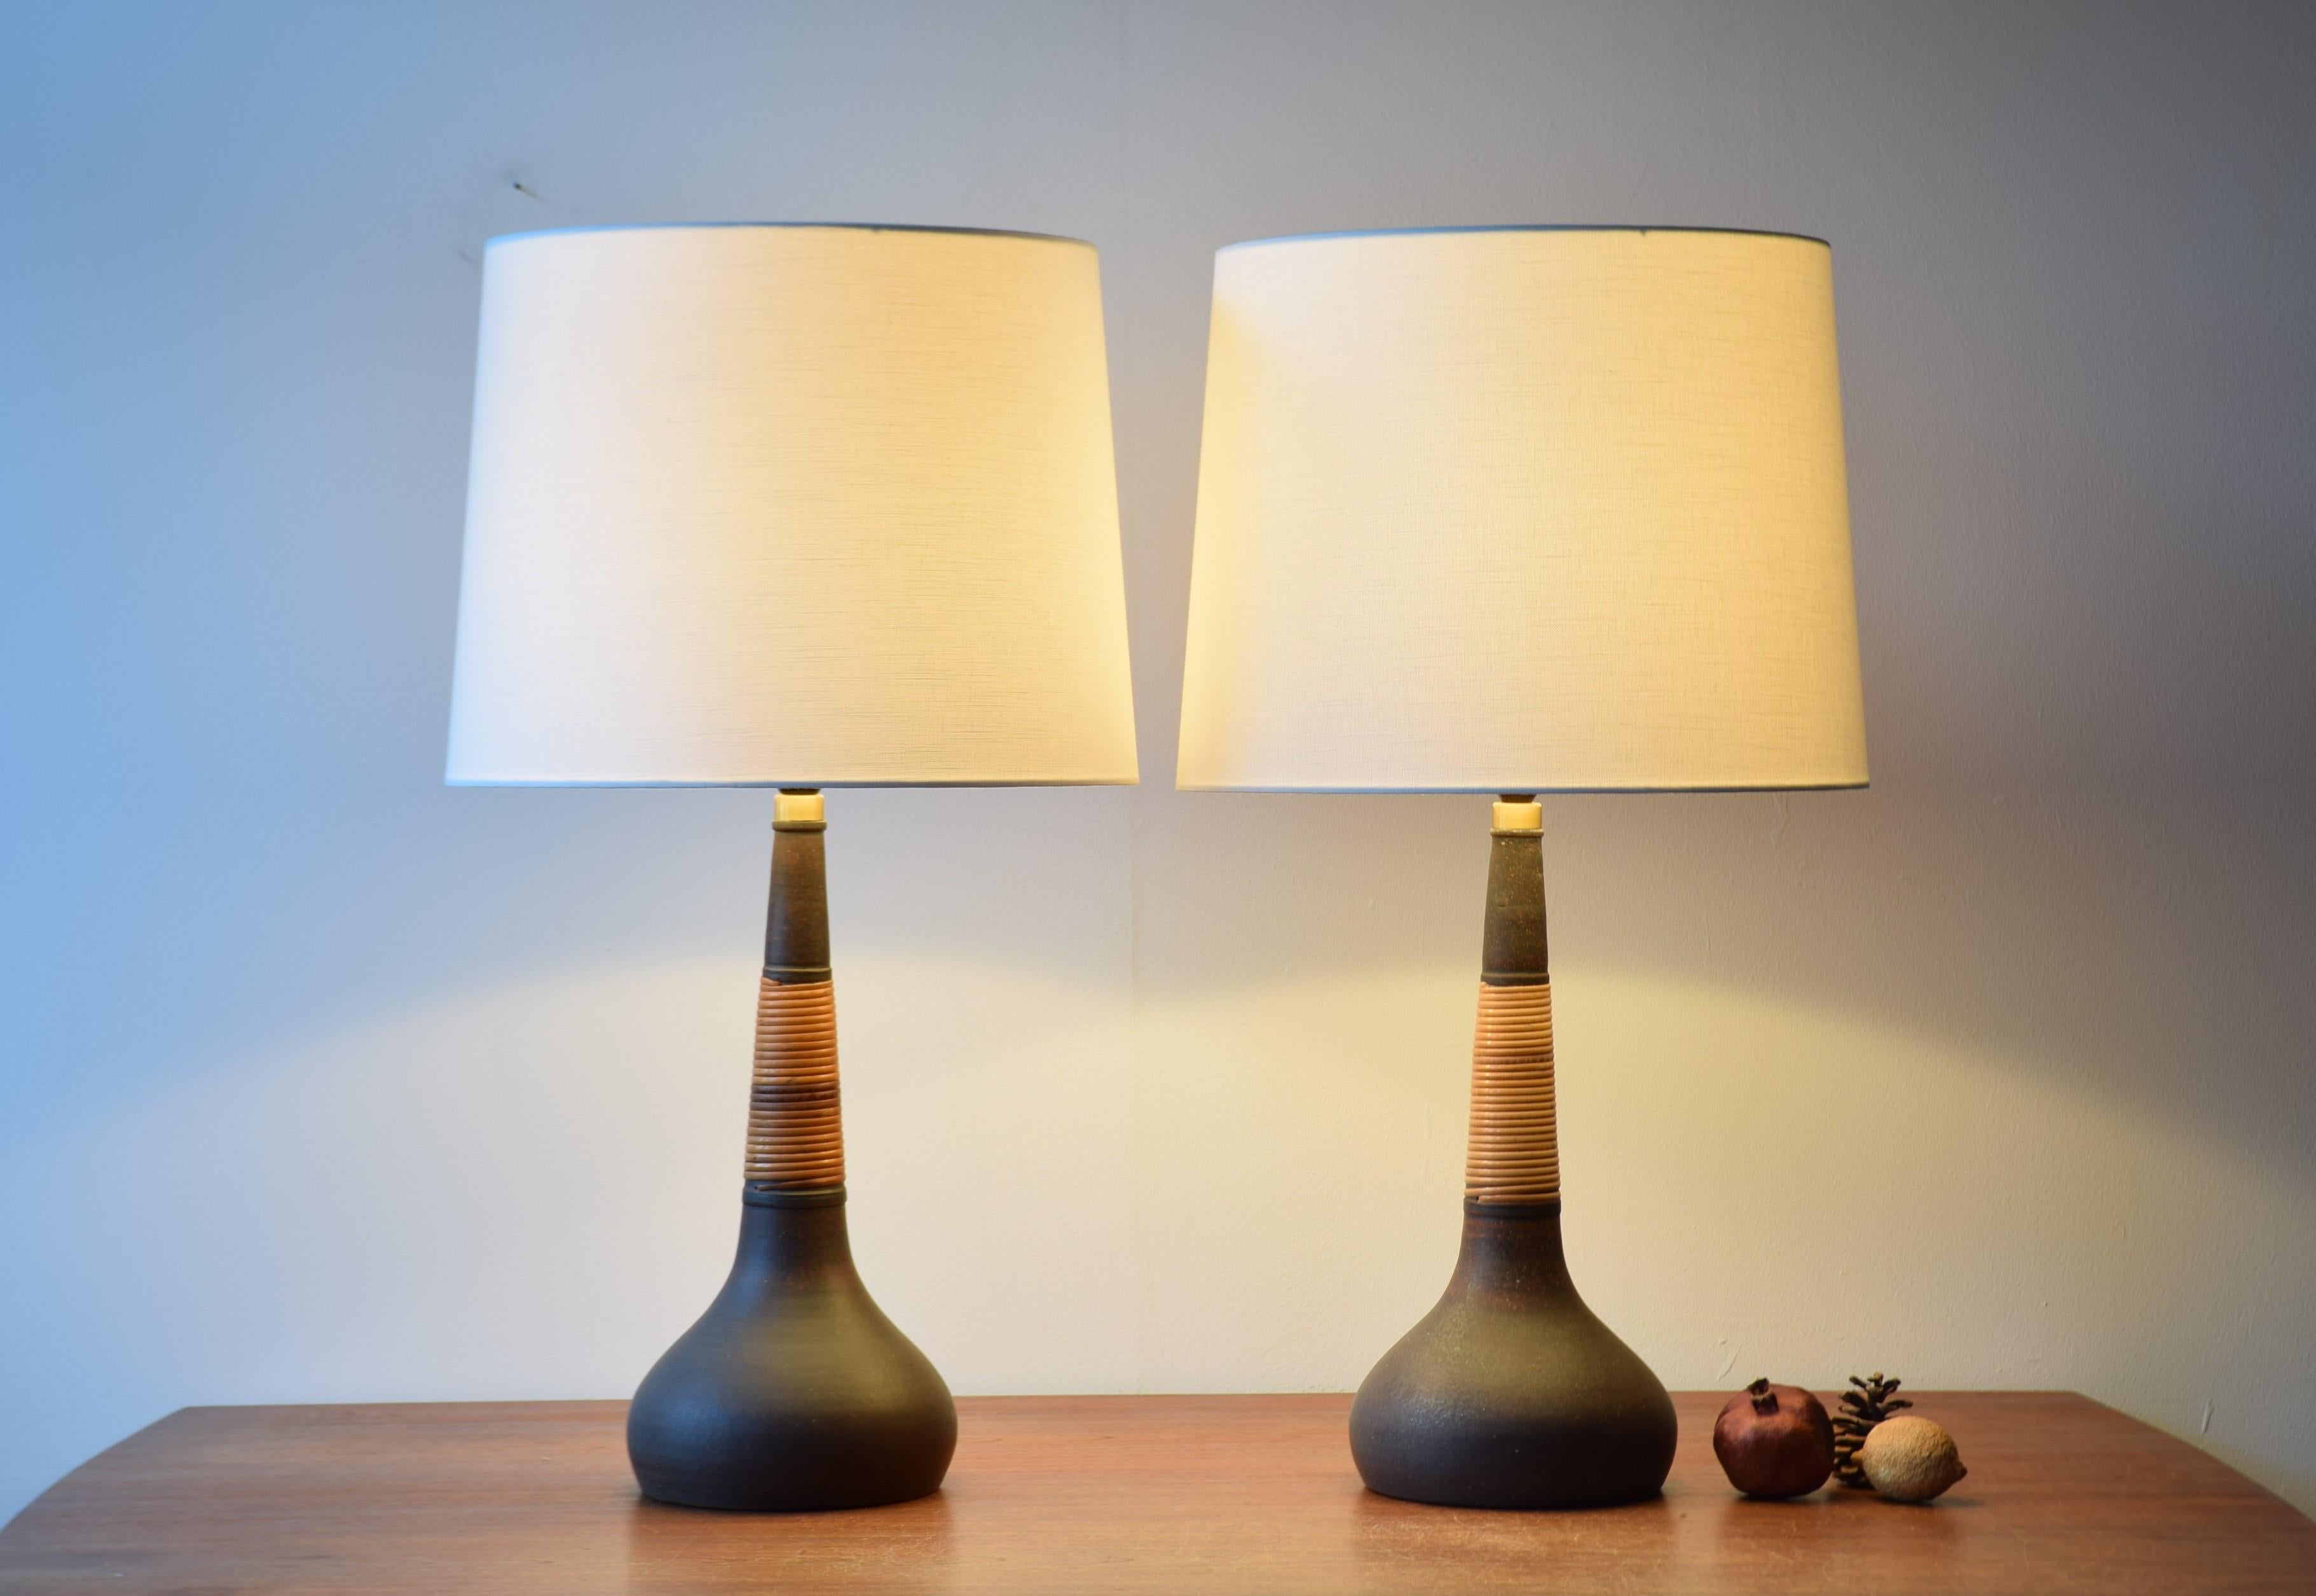 Rare pair of table lamps from the Danish pottery Kähler (HAK) made for Le Klint. The lampshades are included.

The lamps are made of unglazed ceramic wrapped with cane for a stylish and warm look.
Most likely designed by Esben Klint and made ca